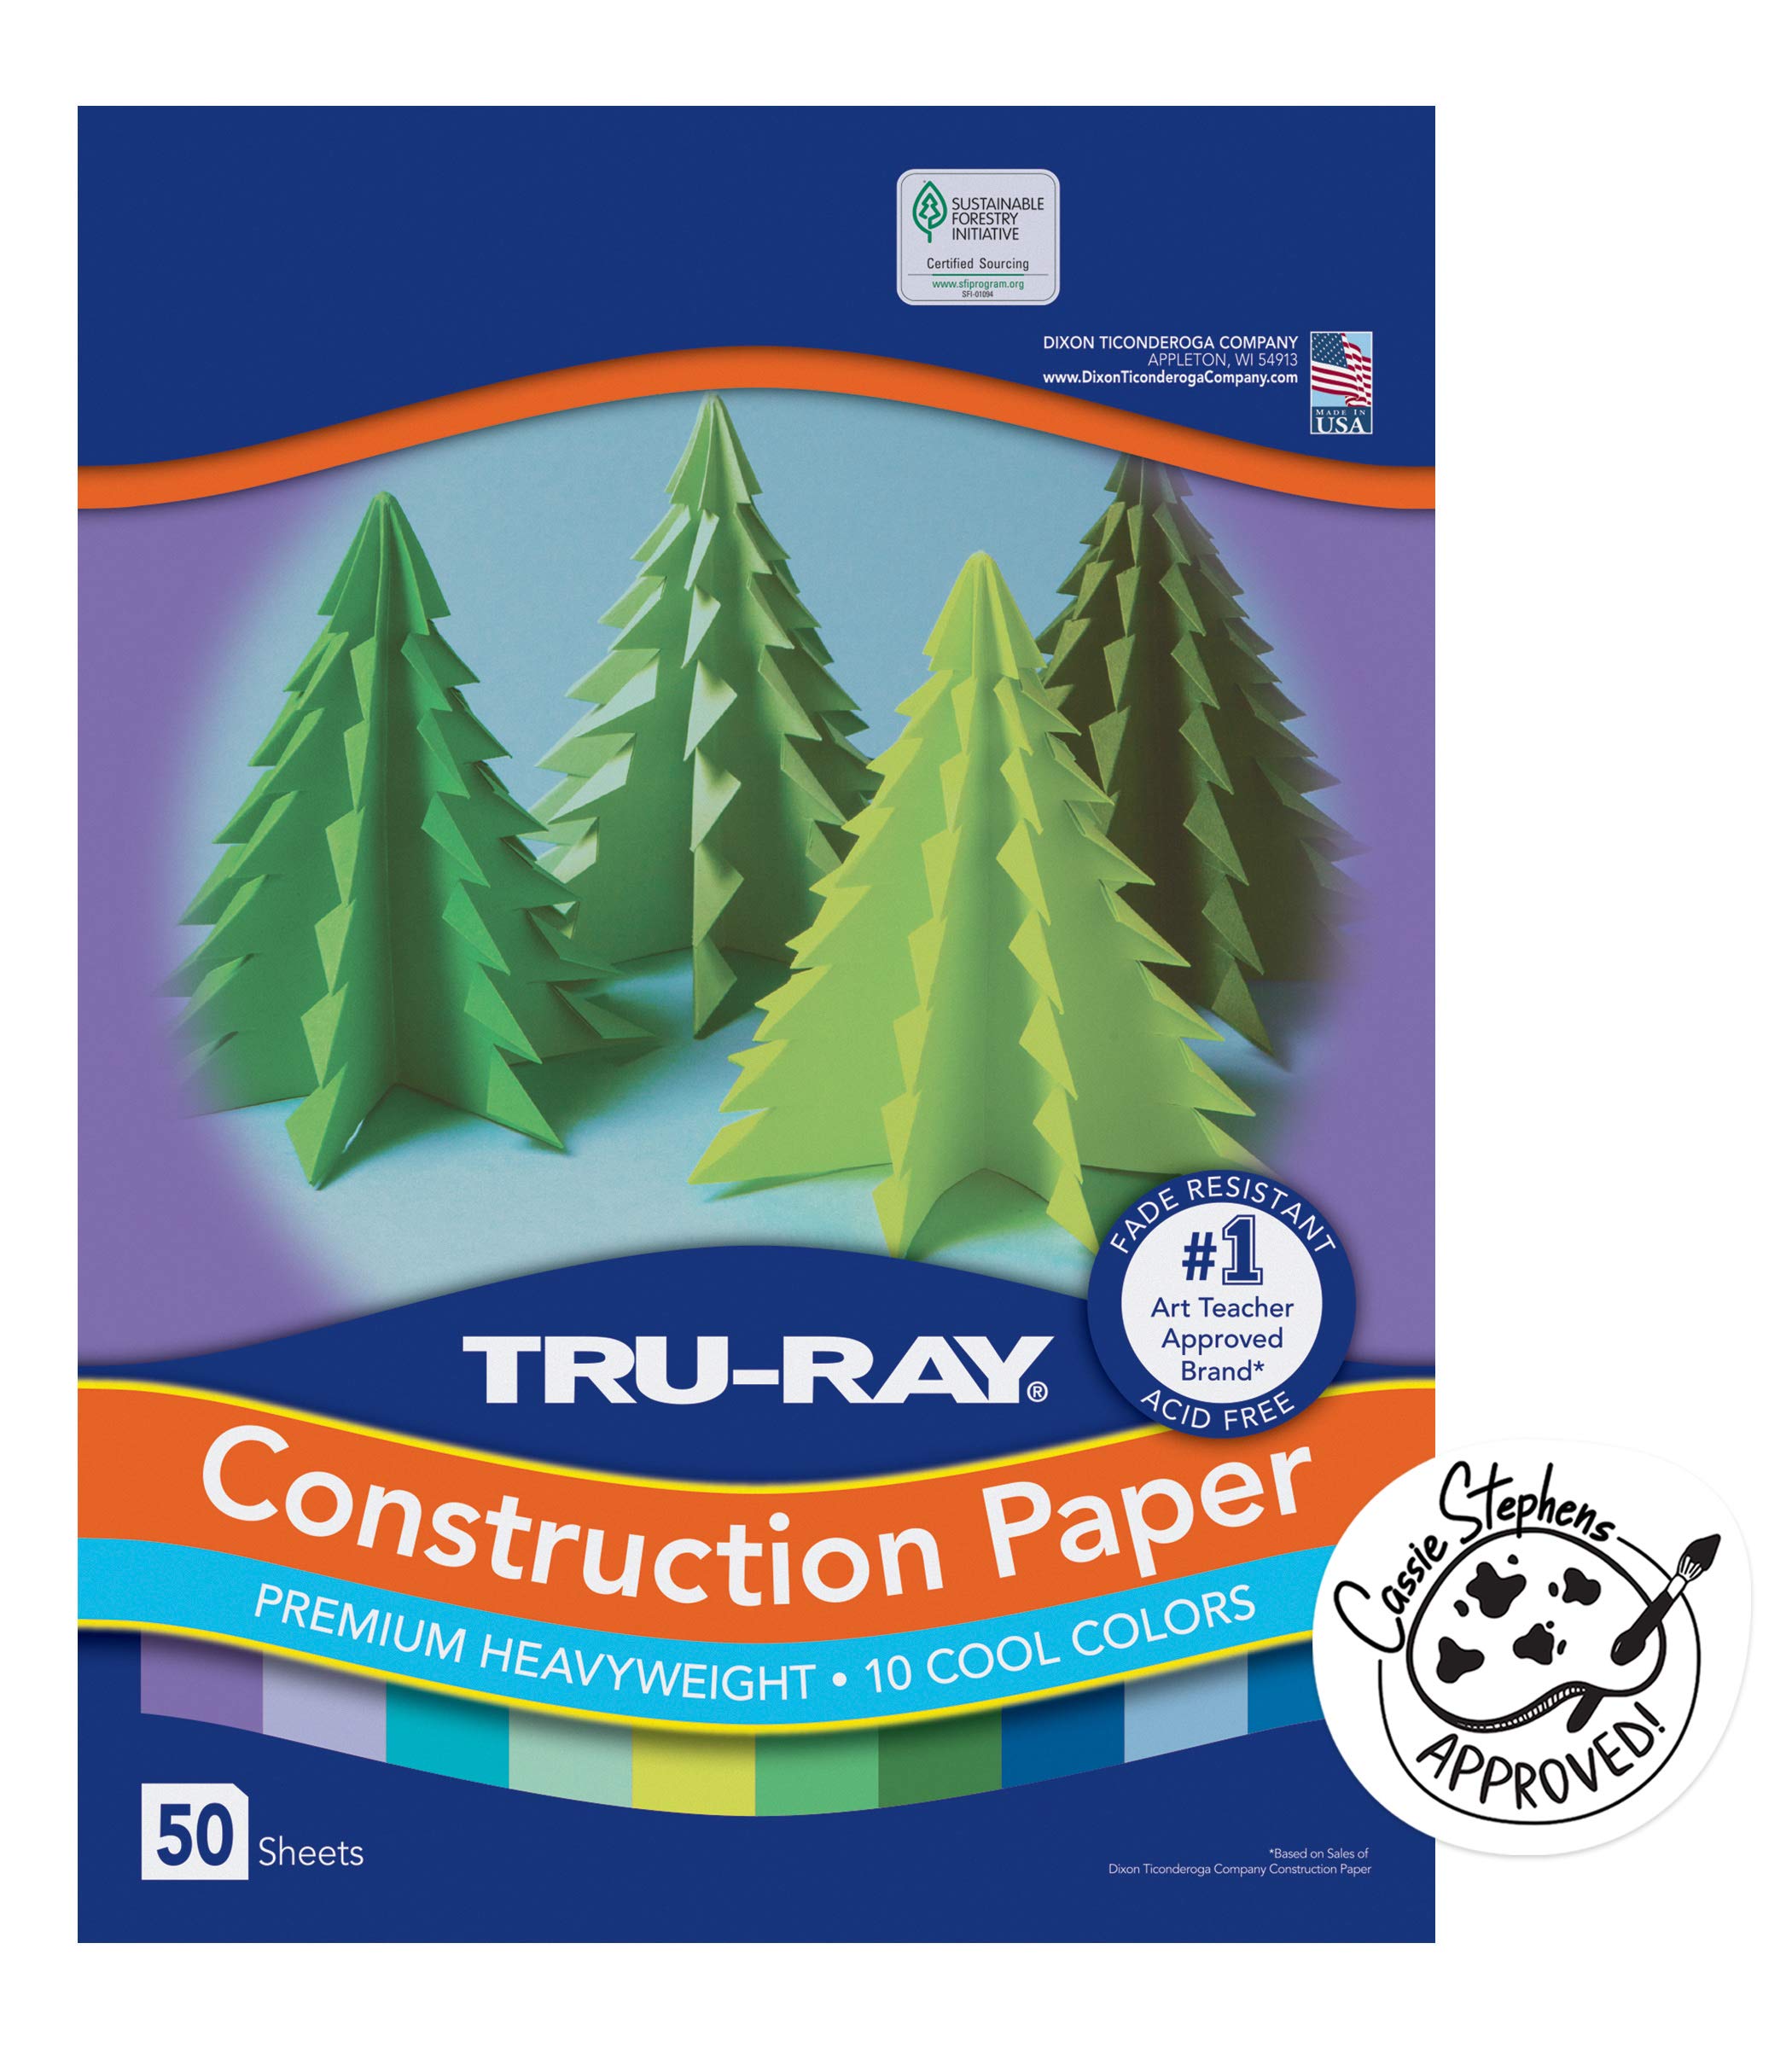 "Tru-Ray Heavyweight Construction Paper, Cool Assorted Colors, 9"" x 12"", 50 Sheets" (102942)